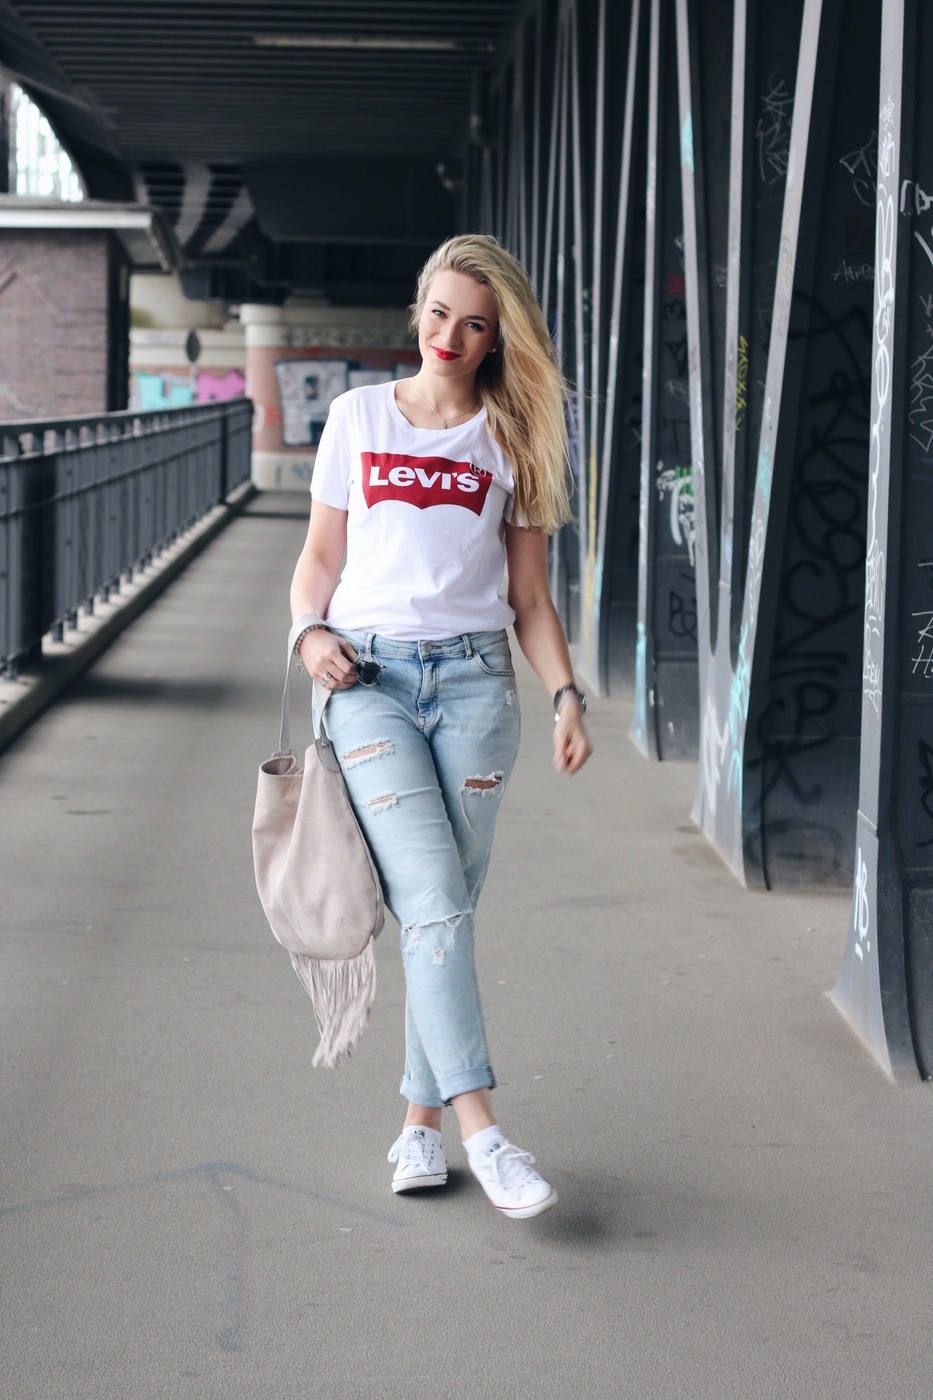 levis top outfit